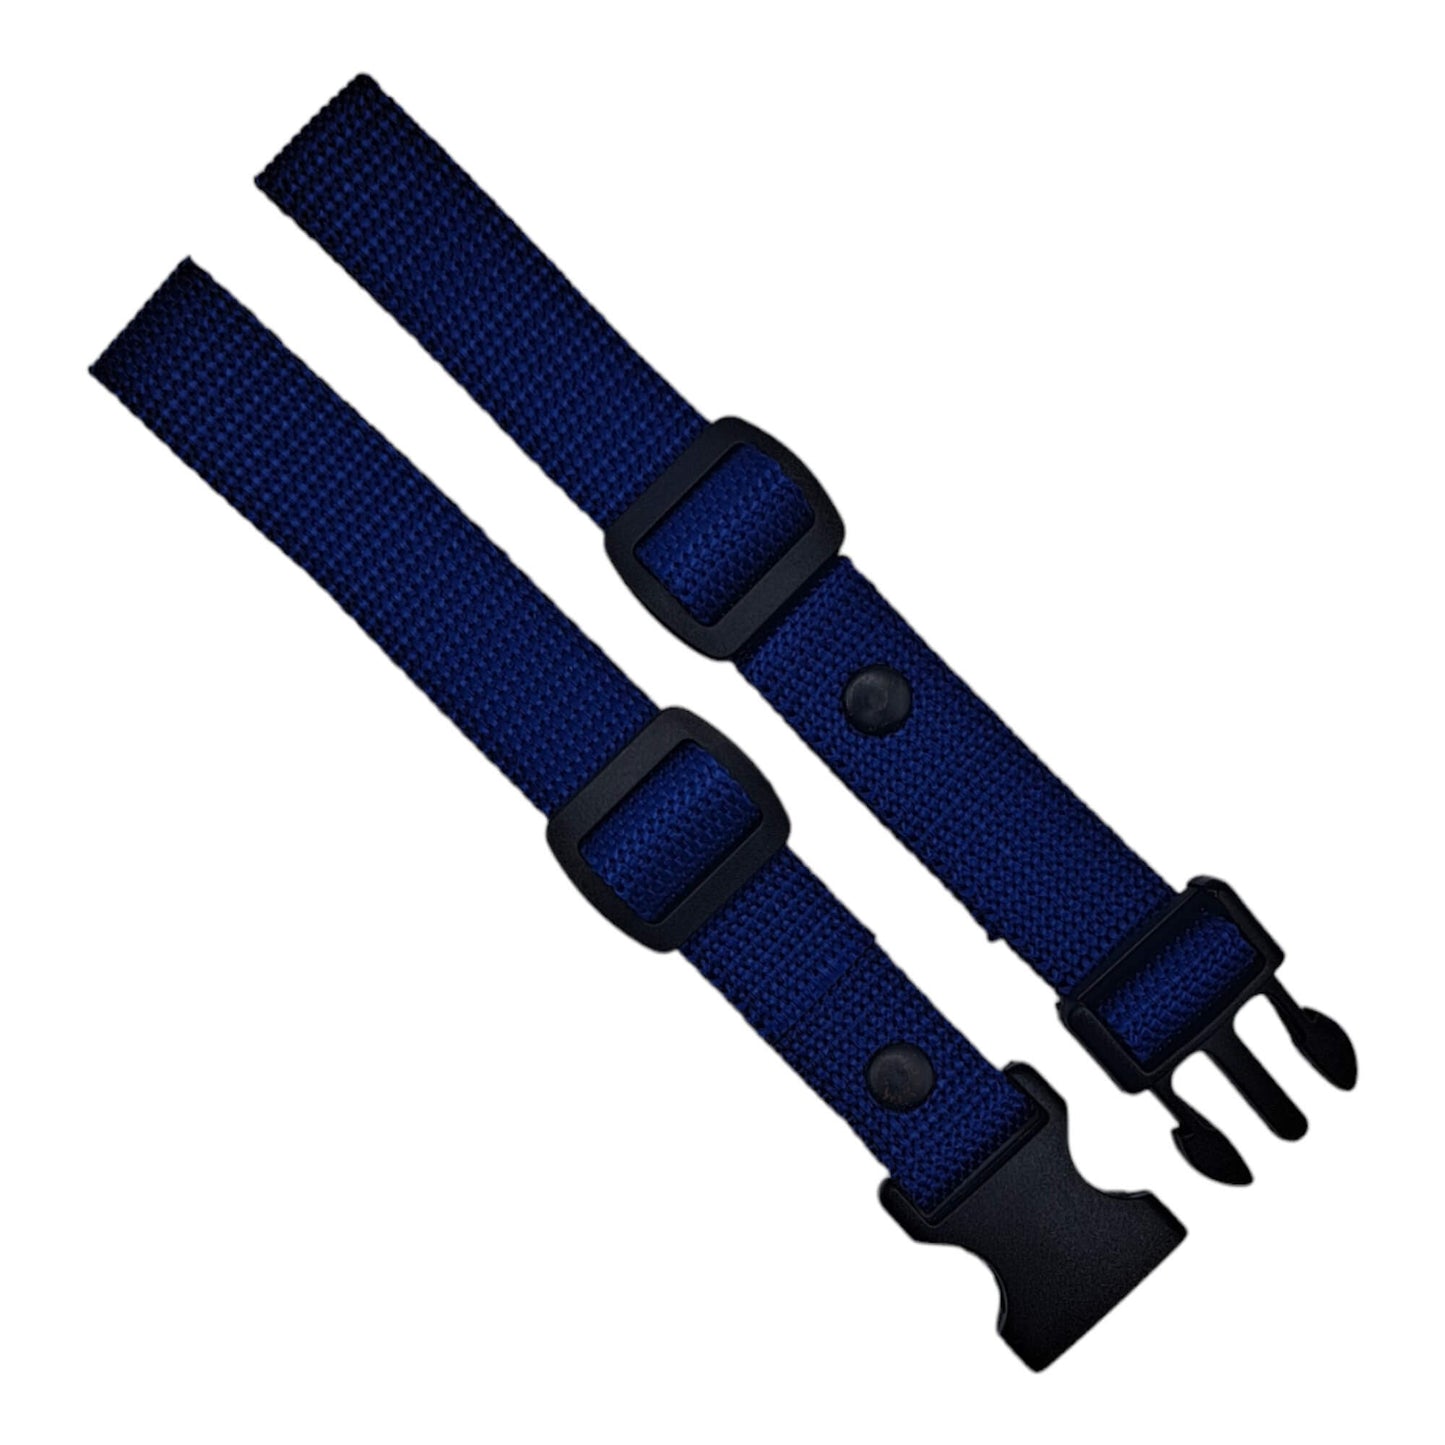 Chest strap No1 for backpacks universal